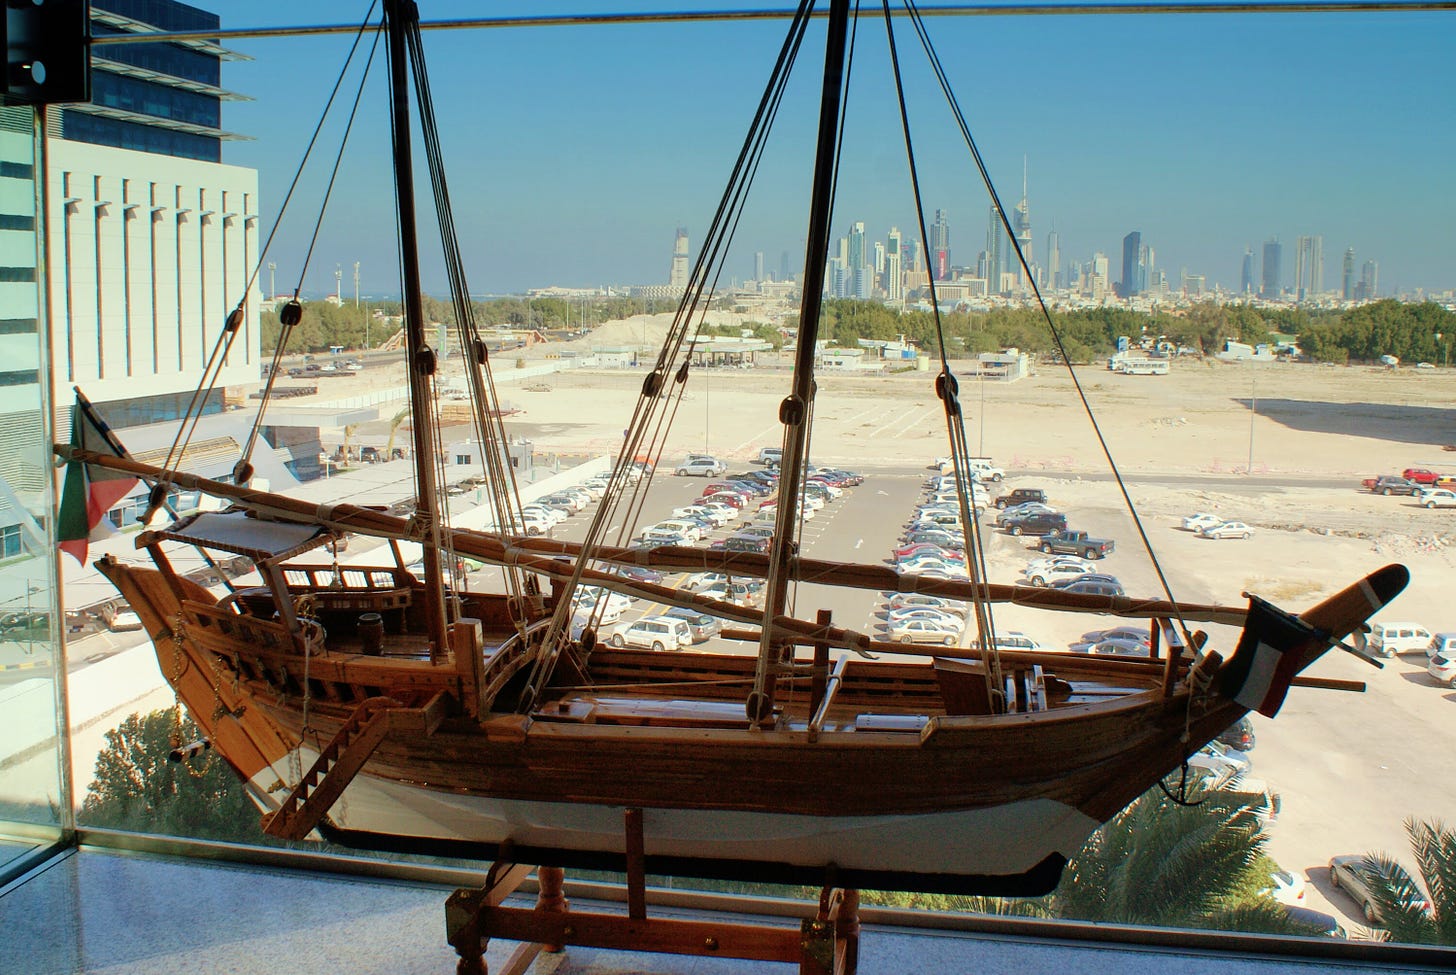 A large wooden model replica of an Arabian dhow sits by the window of a modern building overlooking a middle-eastern city skyline.